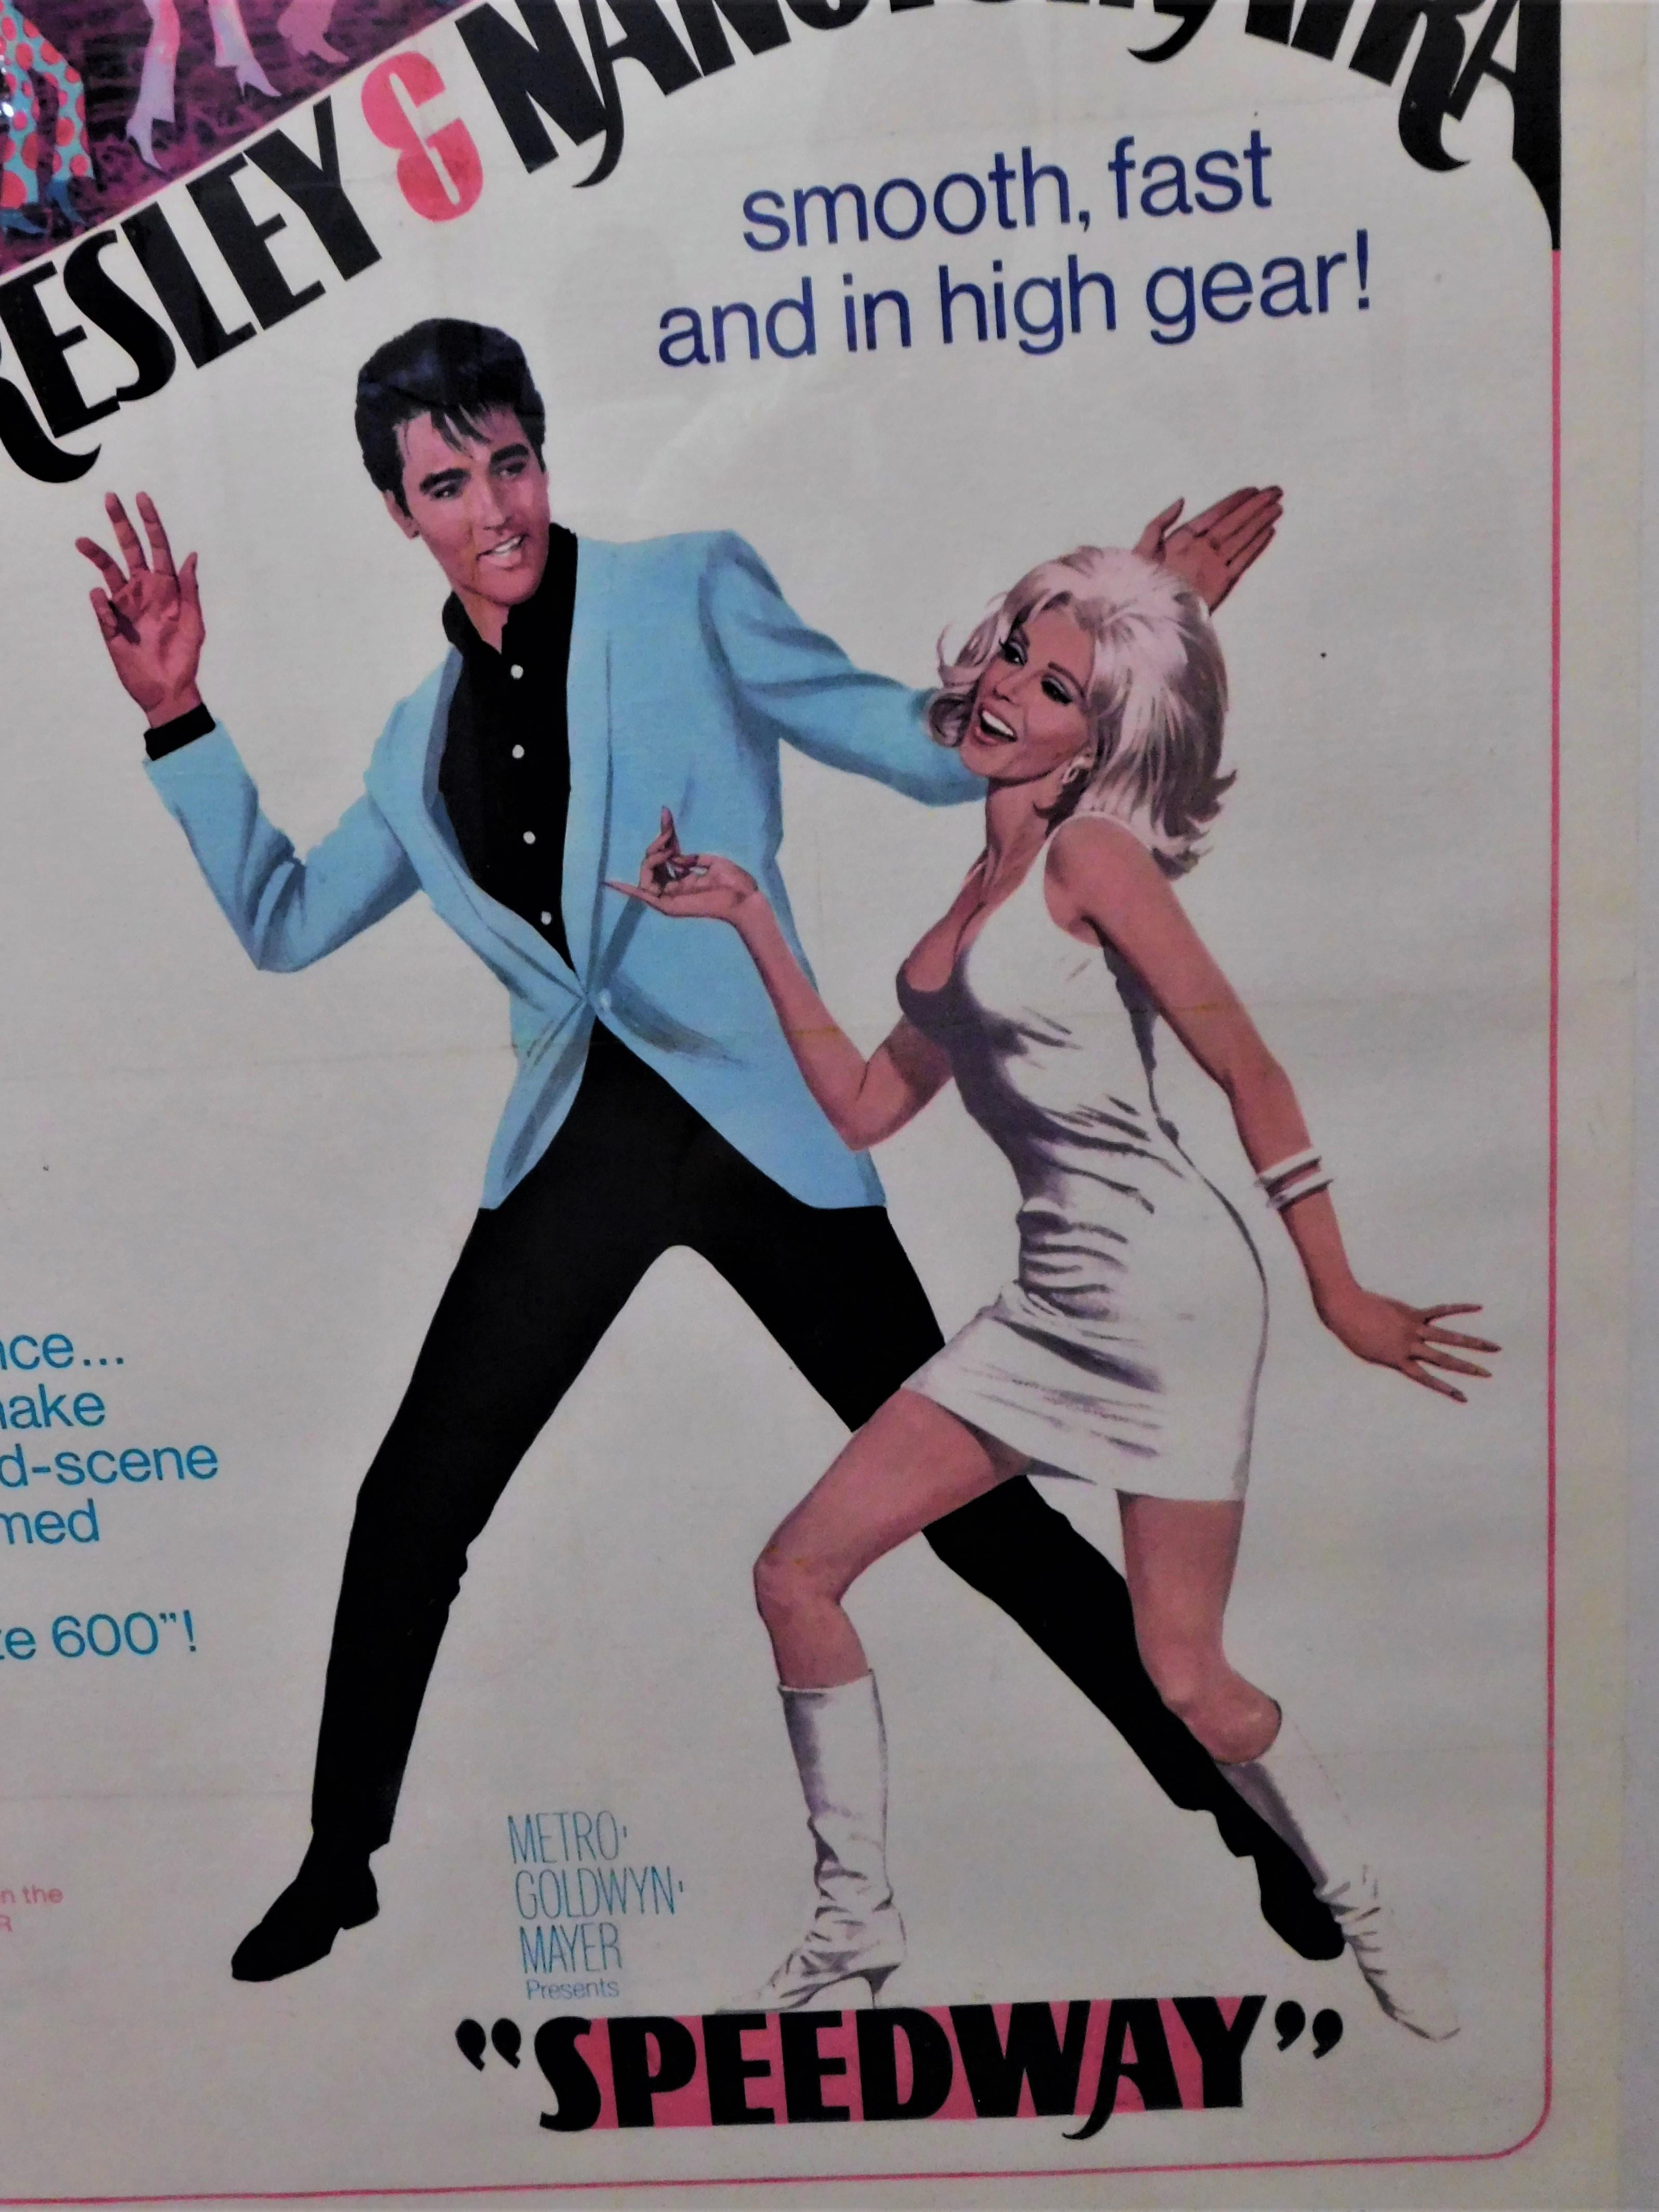 Speedway, one sheet 1968 art of Elvis Presley dancing with the very sexy Nancy Sinatra in her famous white boots!
An original vintage theatrical one-sheet movie poster (measures 27